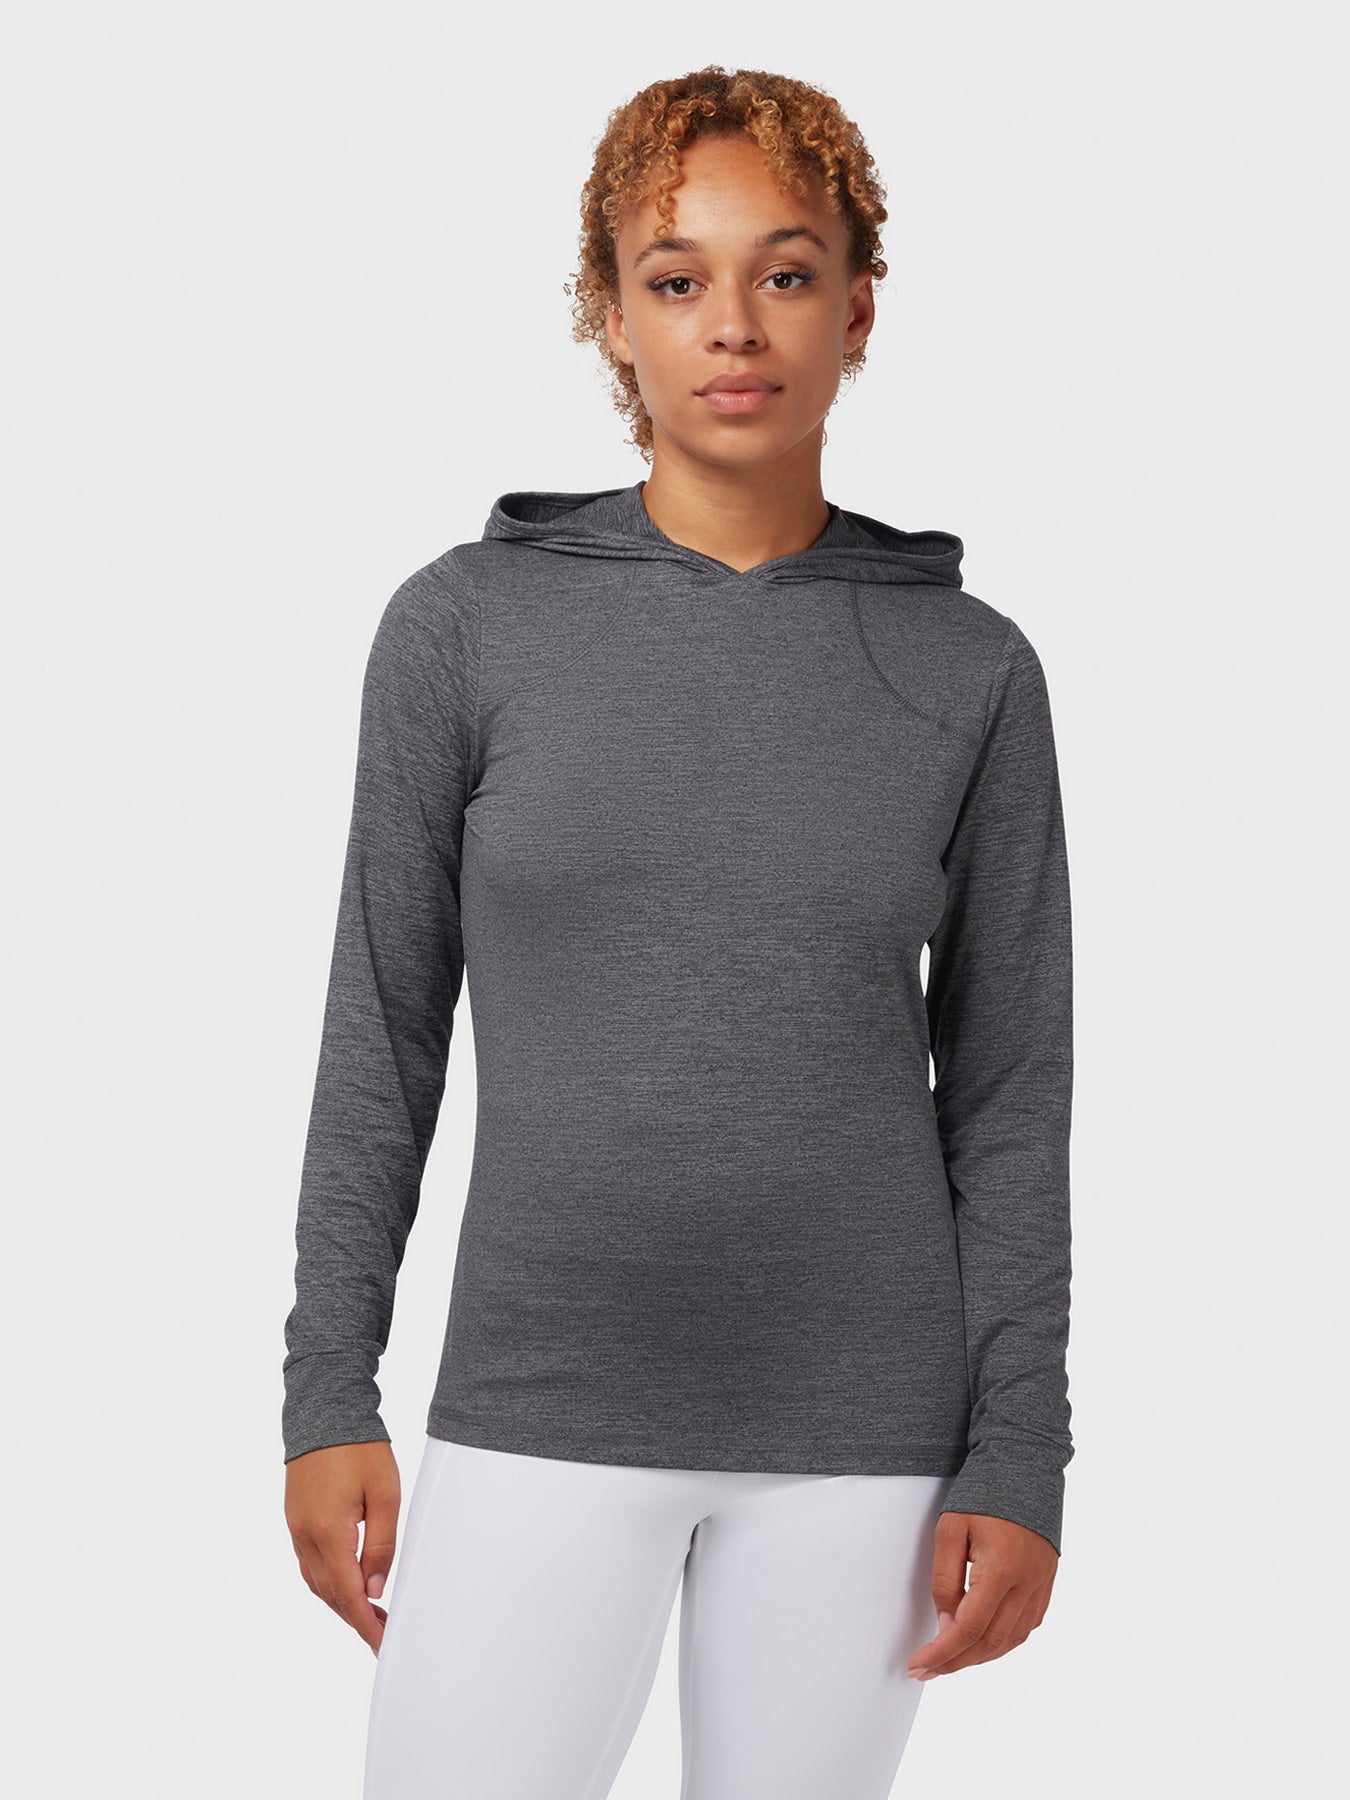 View Brushed Heather Womens Hoodie In Black Heather Black Heather XL information